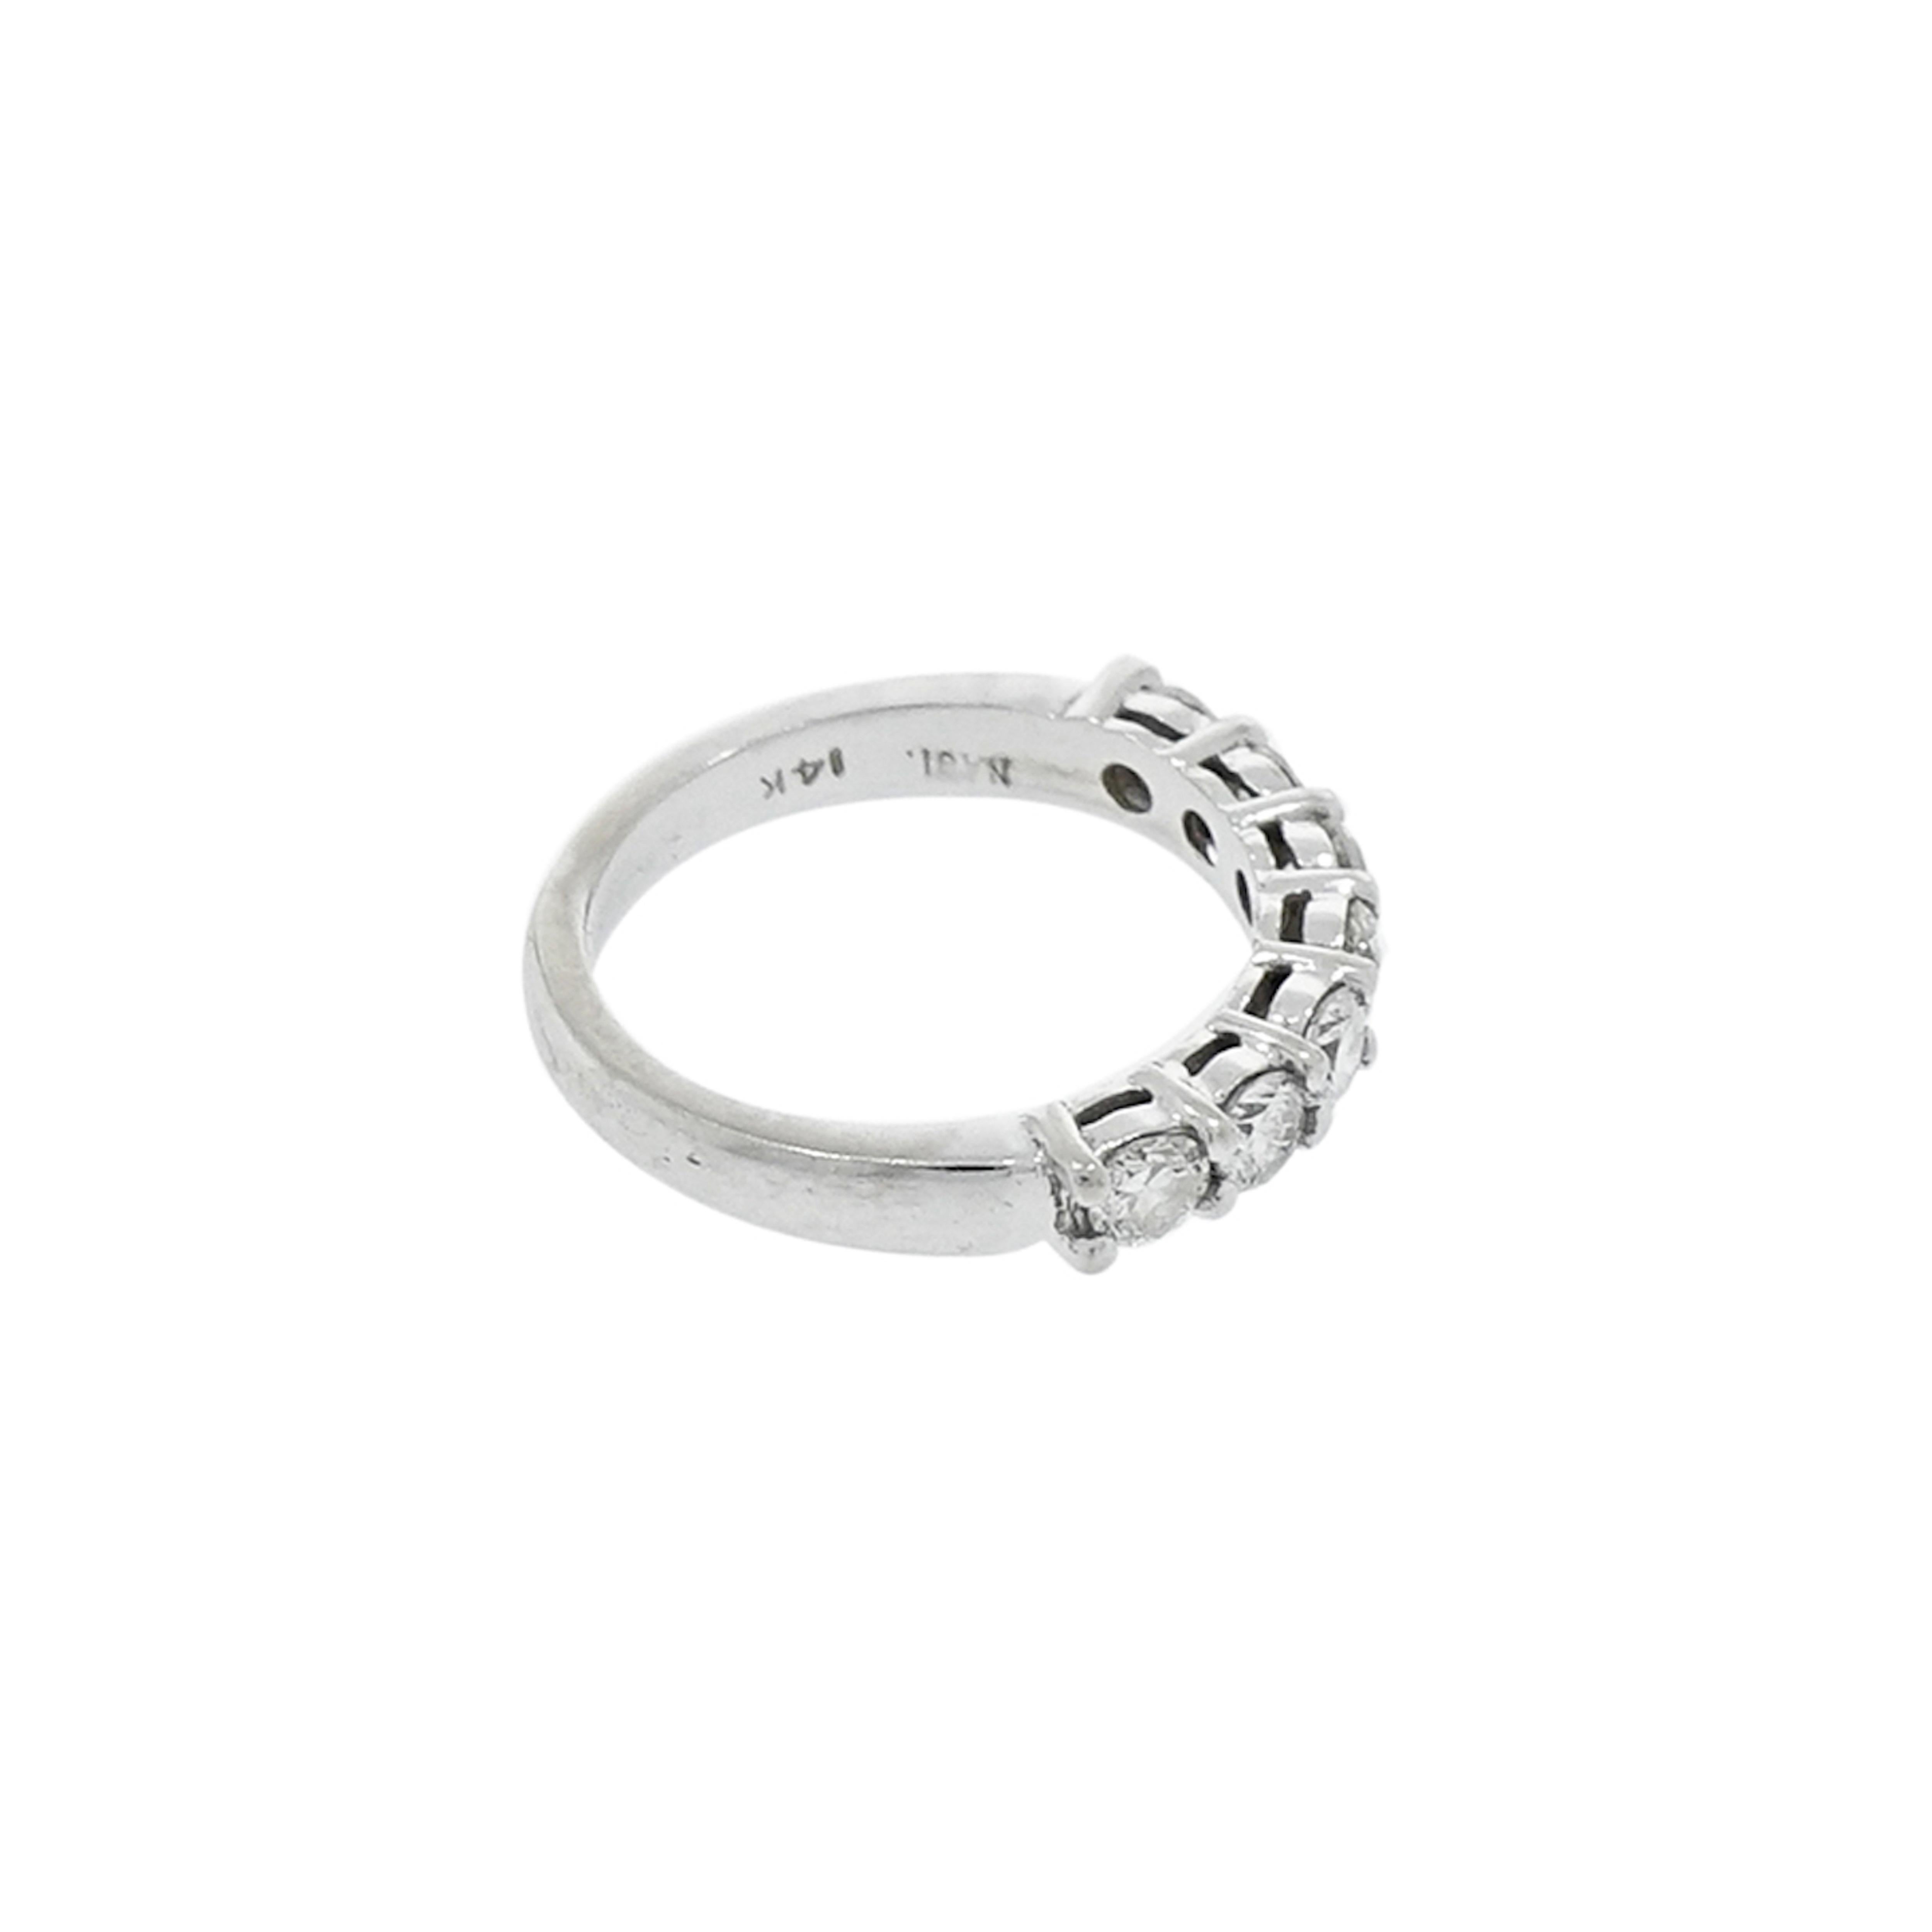 This dazzling Seven Stones diamond anniversary/wedding ring with 0.85carat white round diamonds, H/SI 1. The band measures 3.5mm in width and its crafted for a finger size 5 but can be sized.
